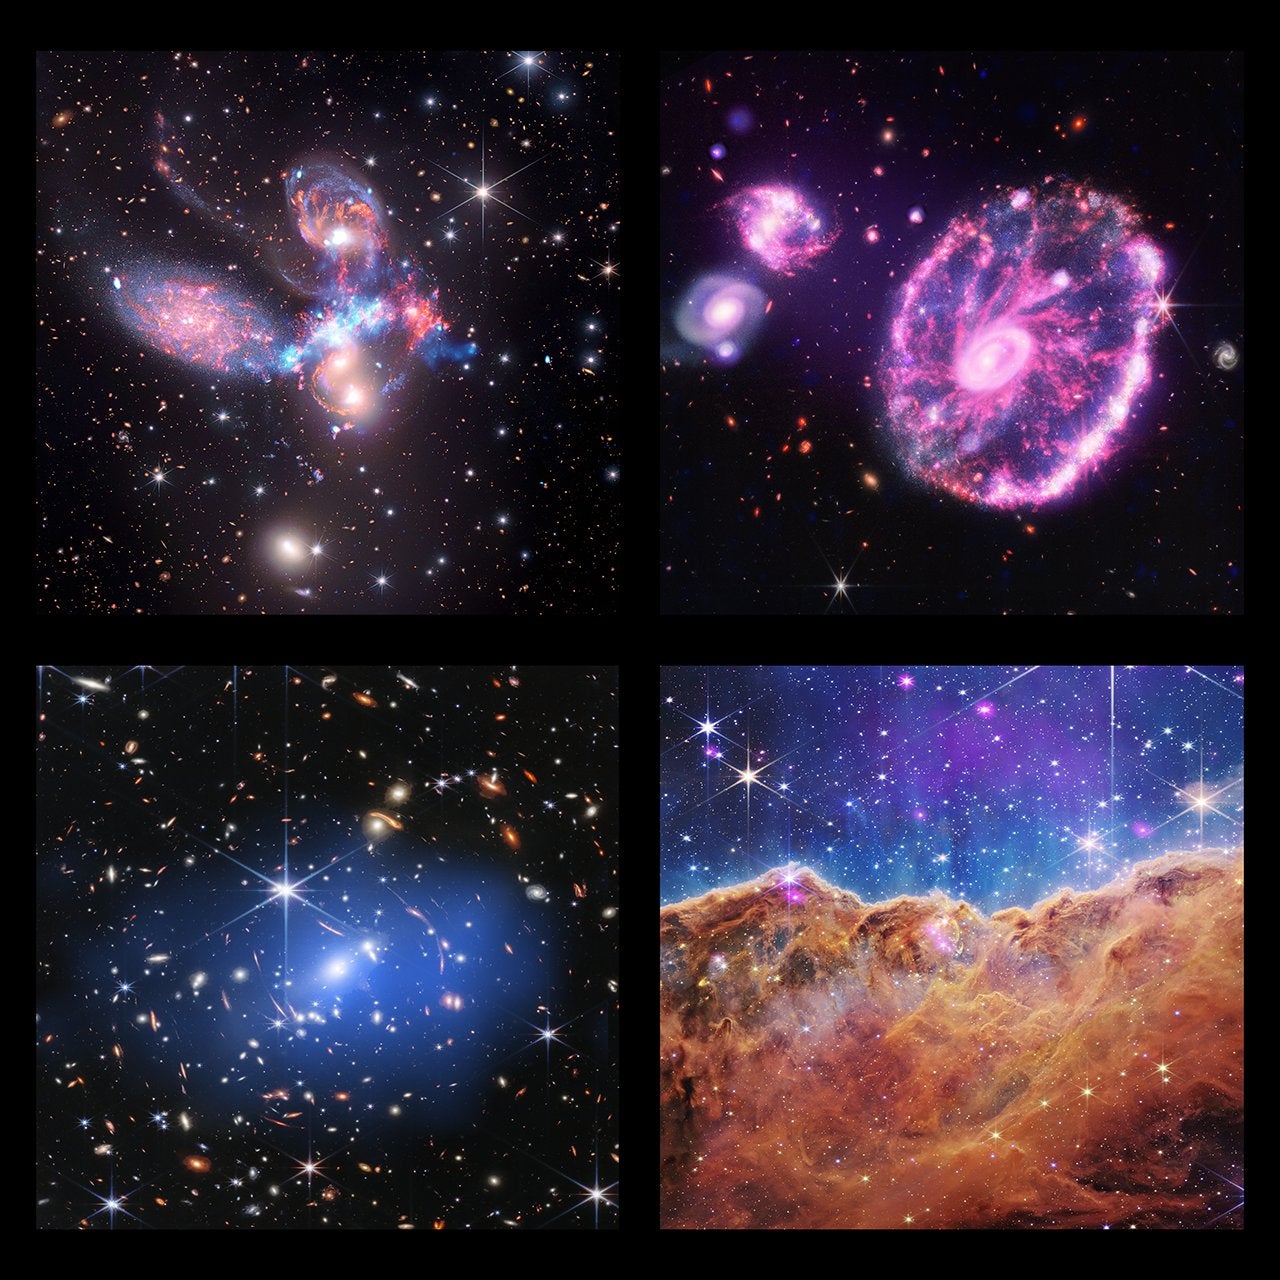 Four images taken by the James Webb Space Telescope have been enhanced by combining them with images taken by the Chandra X-ray Observatory